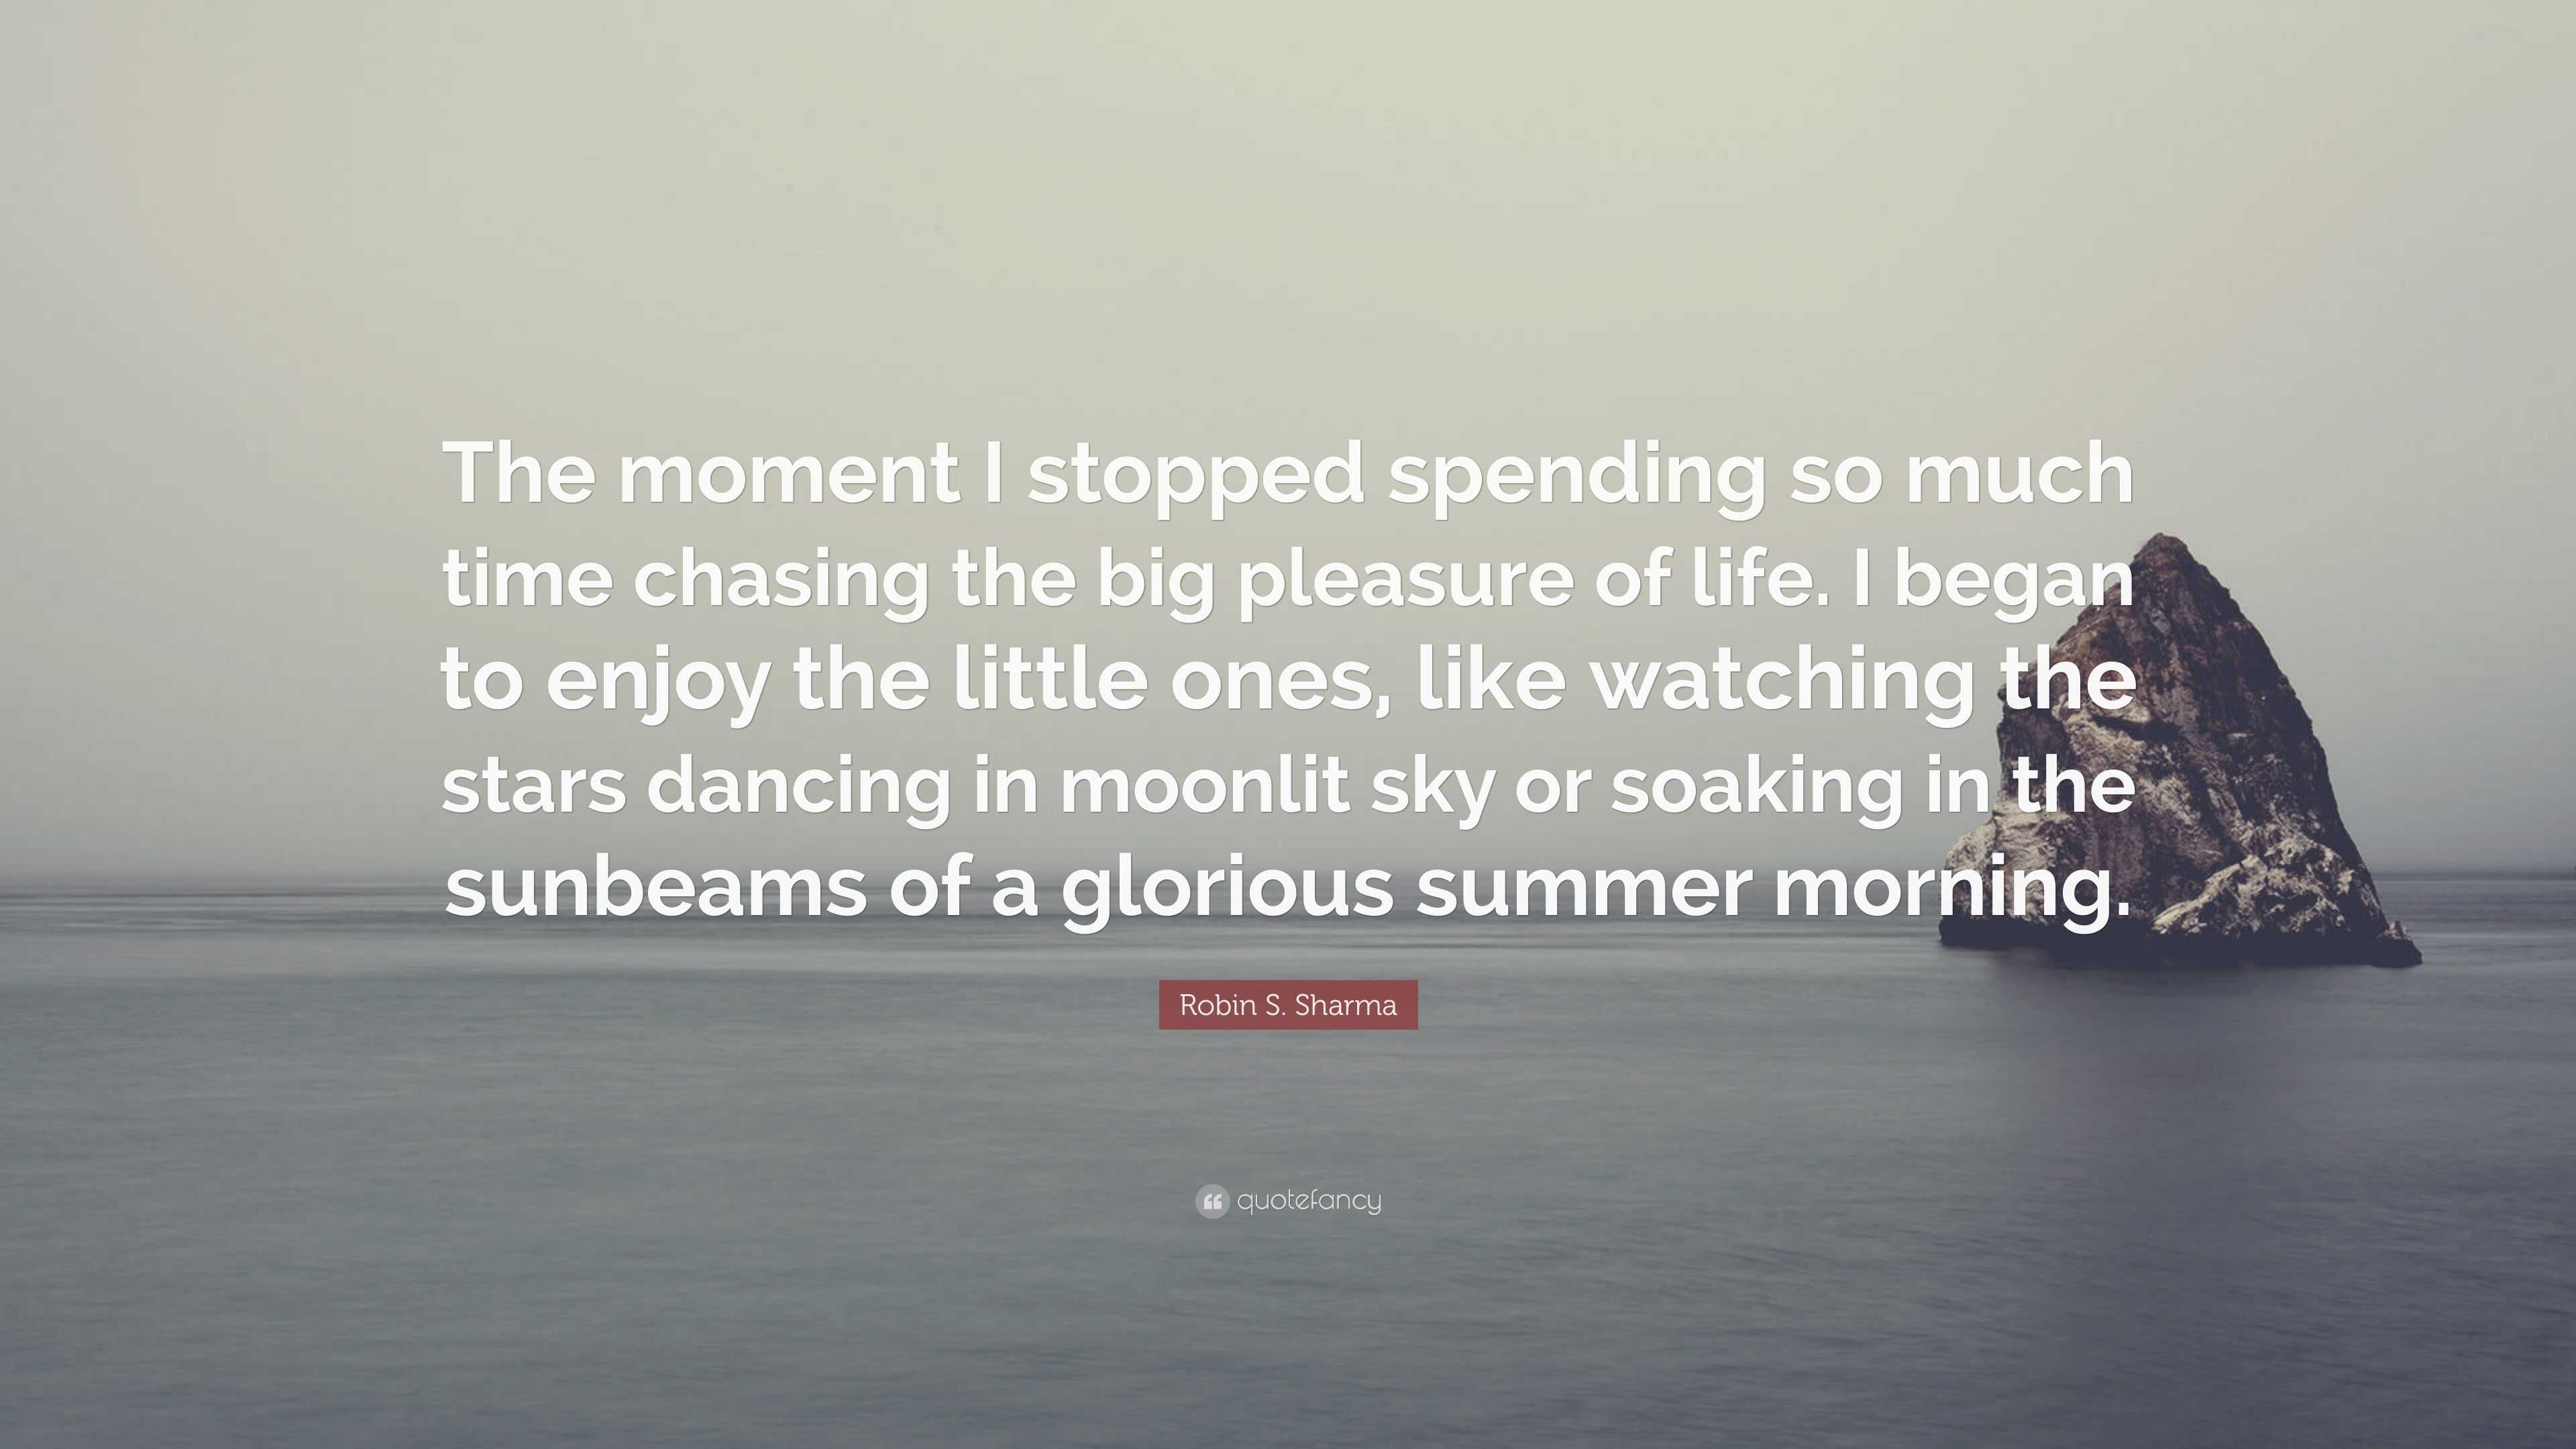 Robin S Sharma Quote “The moment I stopped spending so much time chasing